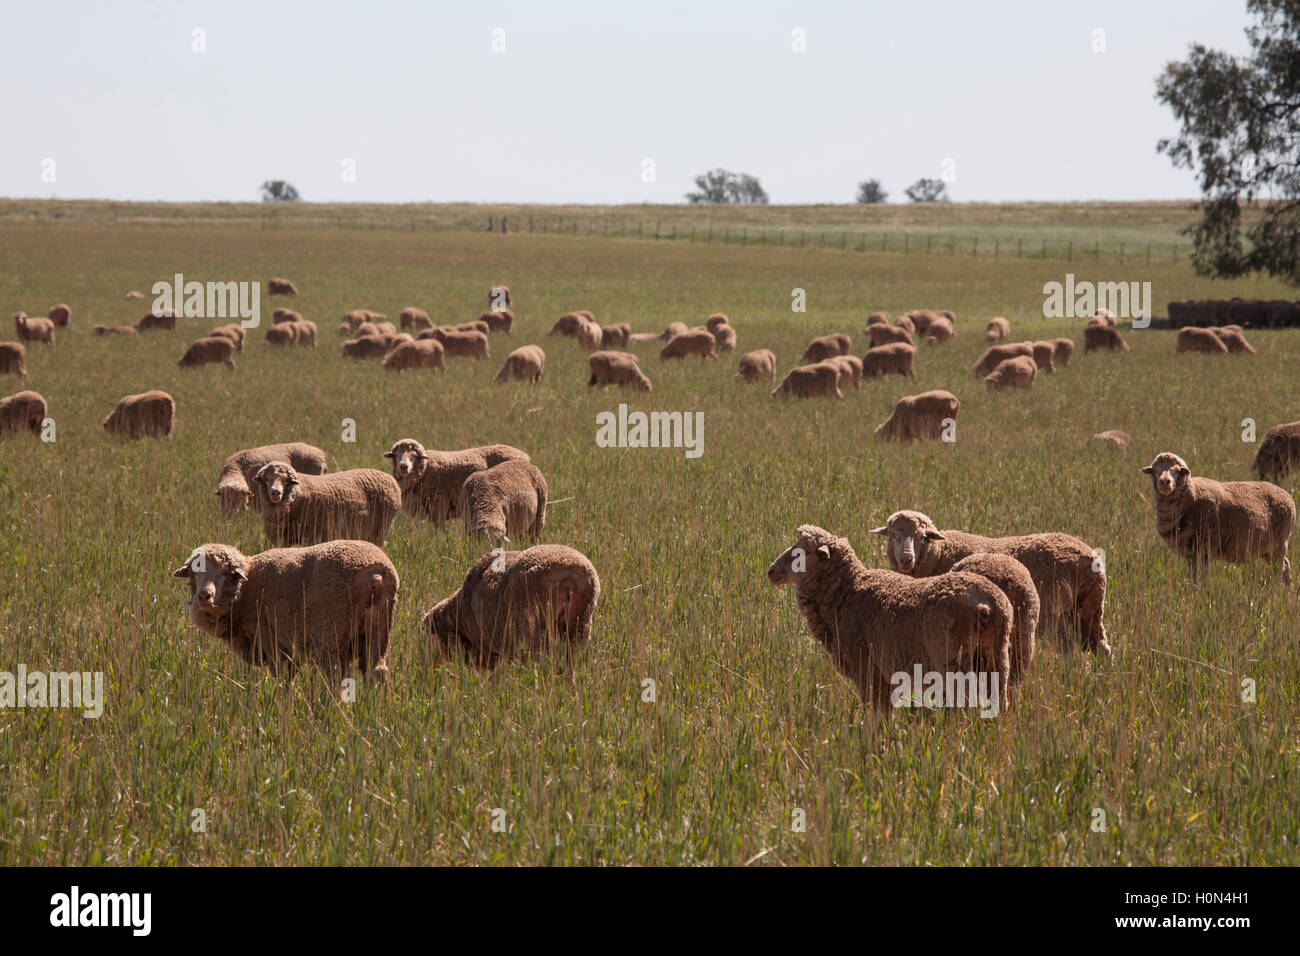 Sheep grazing on open grass pastures New South Wales Australia Stock Photo